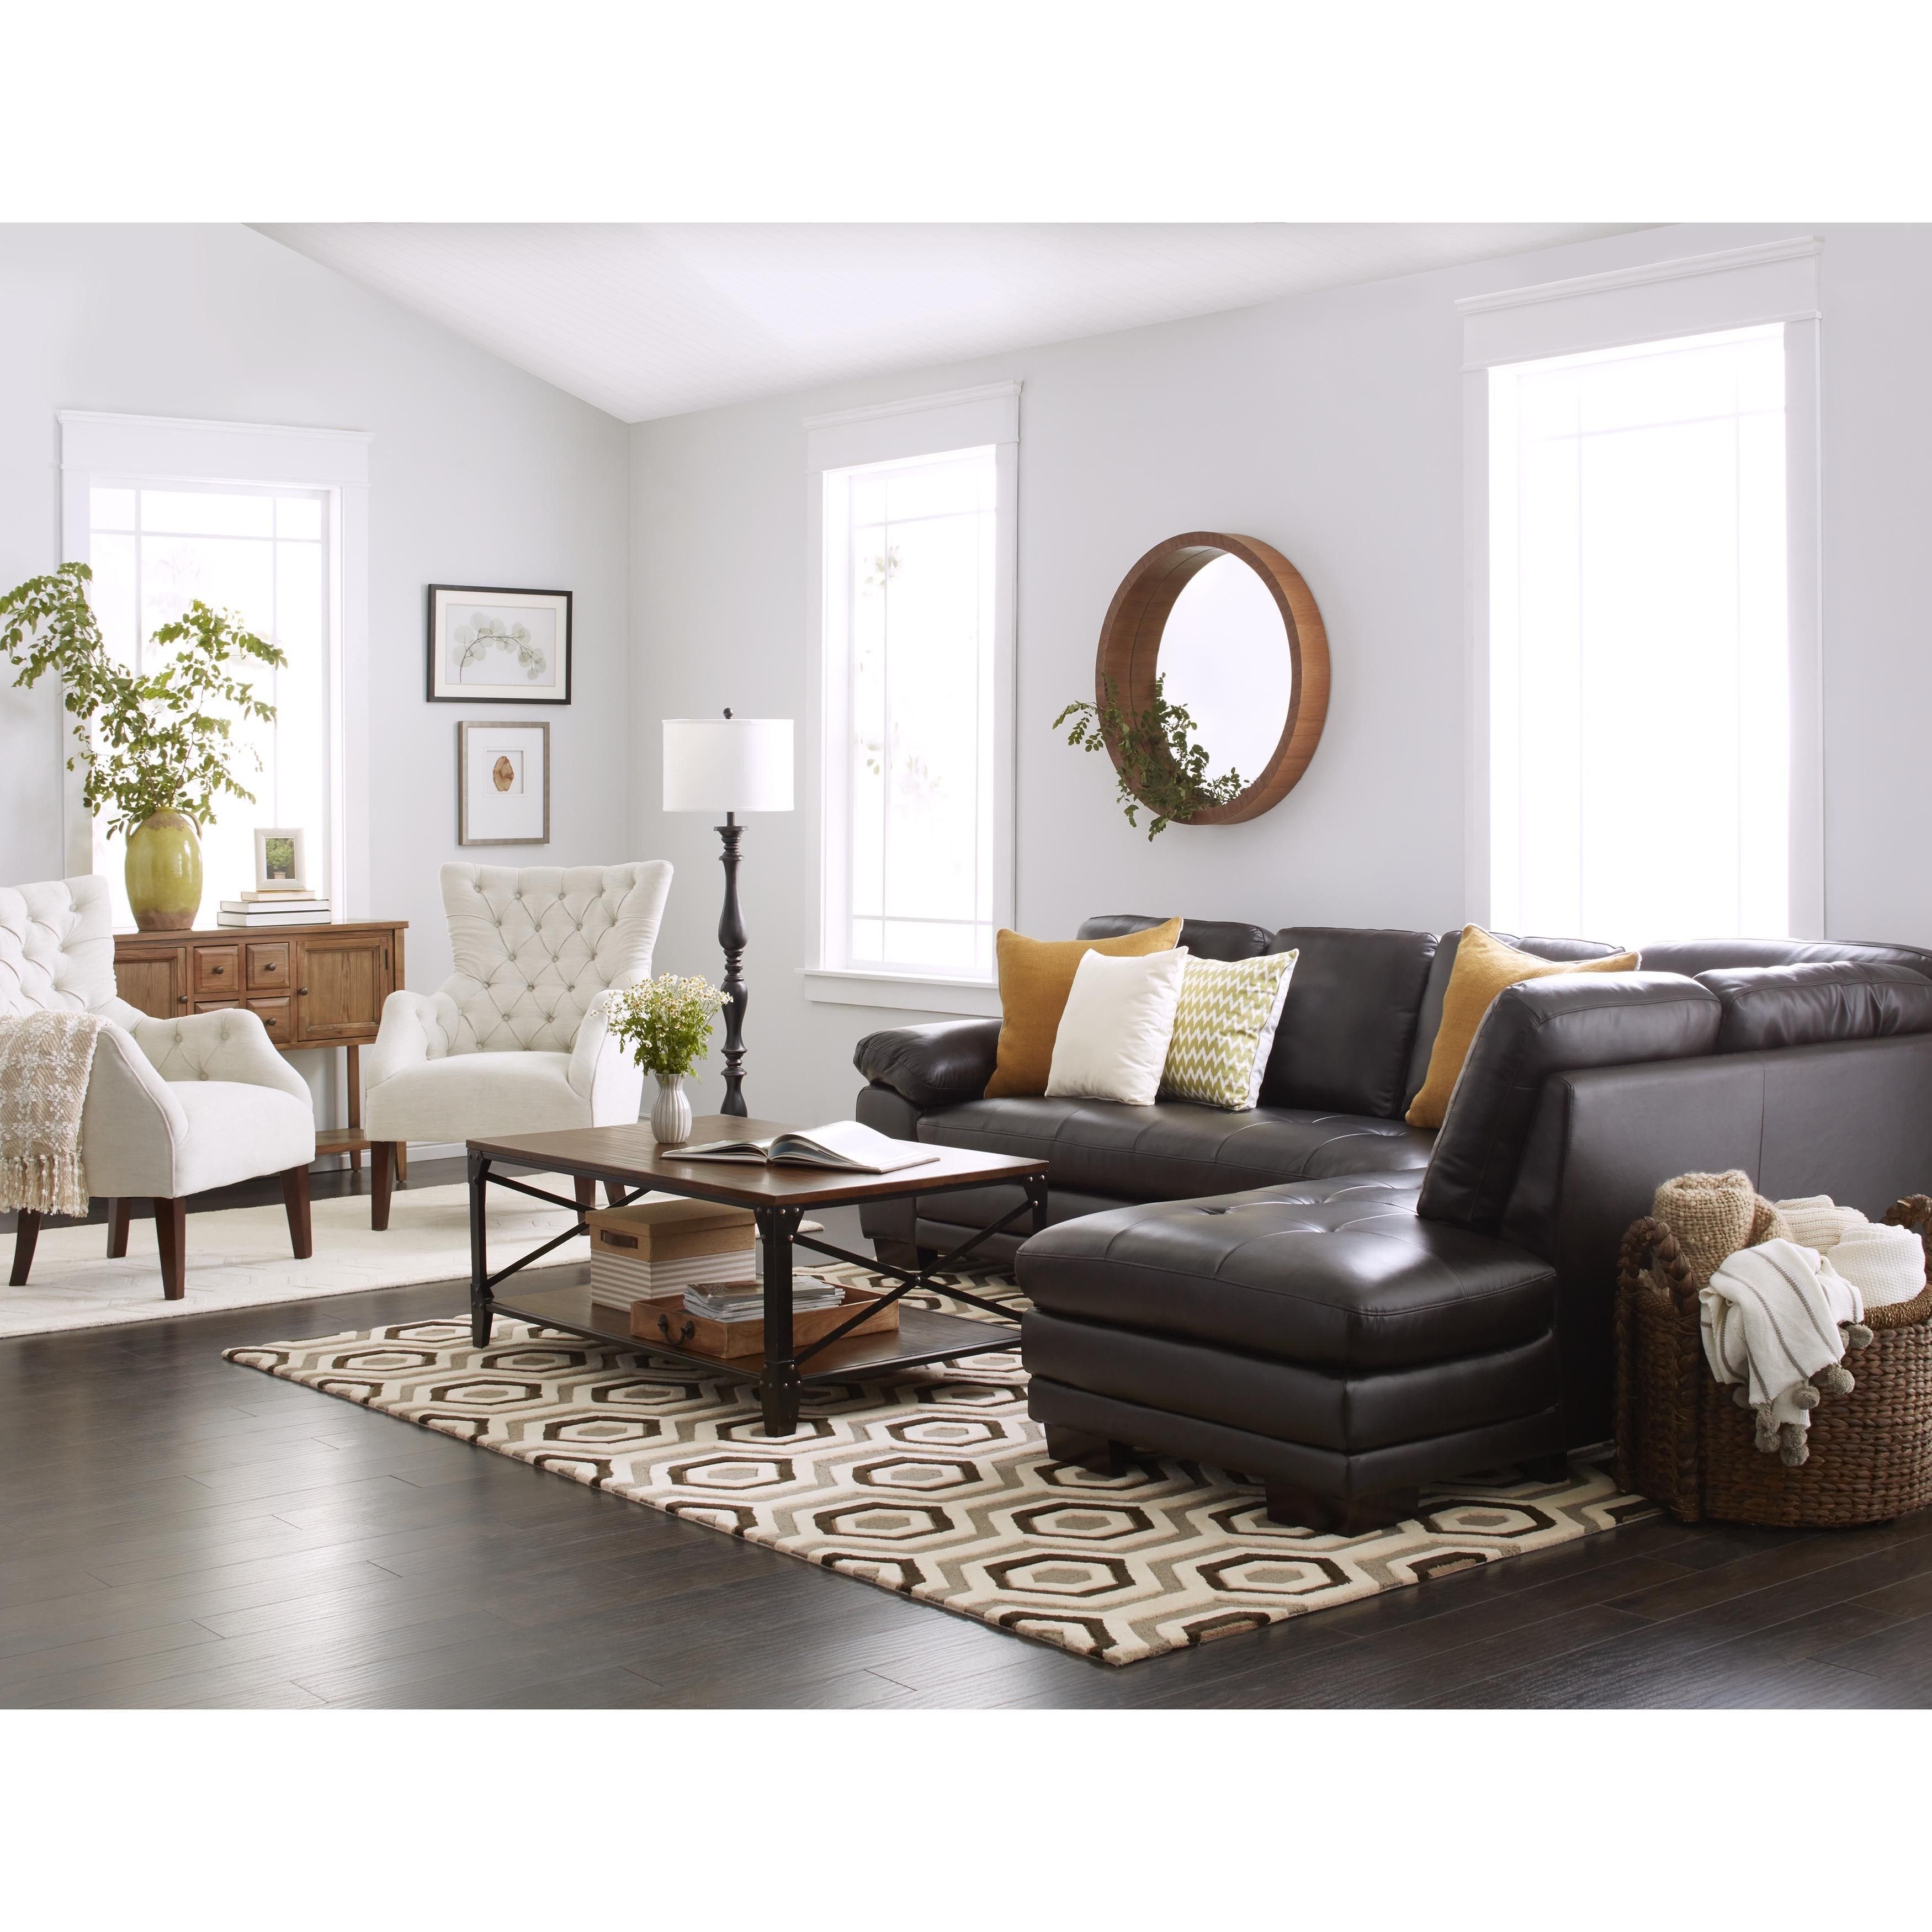 Living Room Decor with Sectional New Abbyson Devonshire Leather Tufted Sectional In 2019